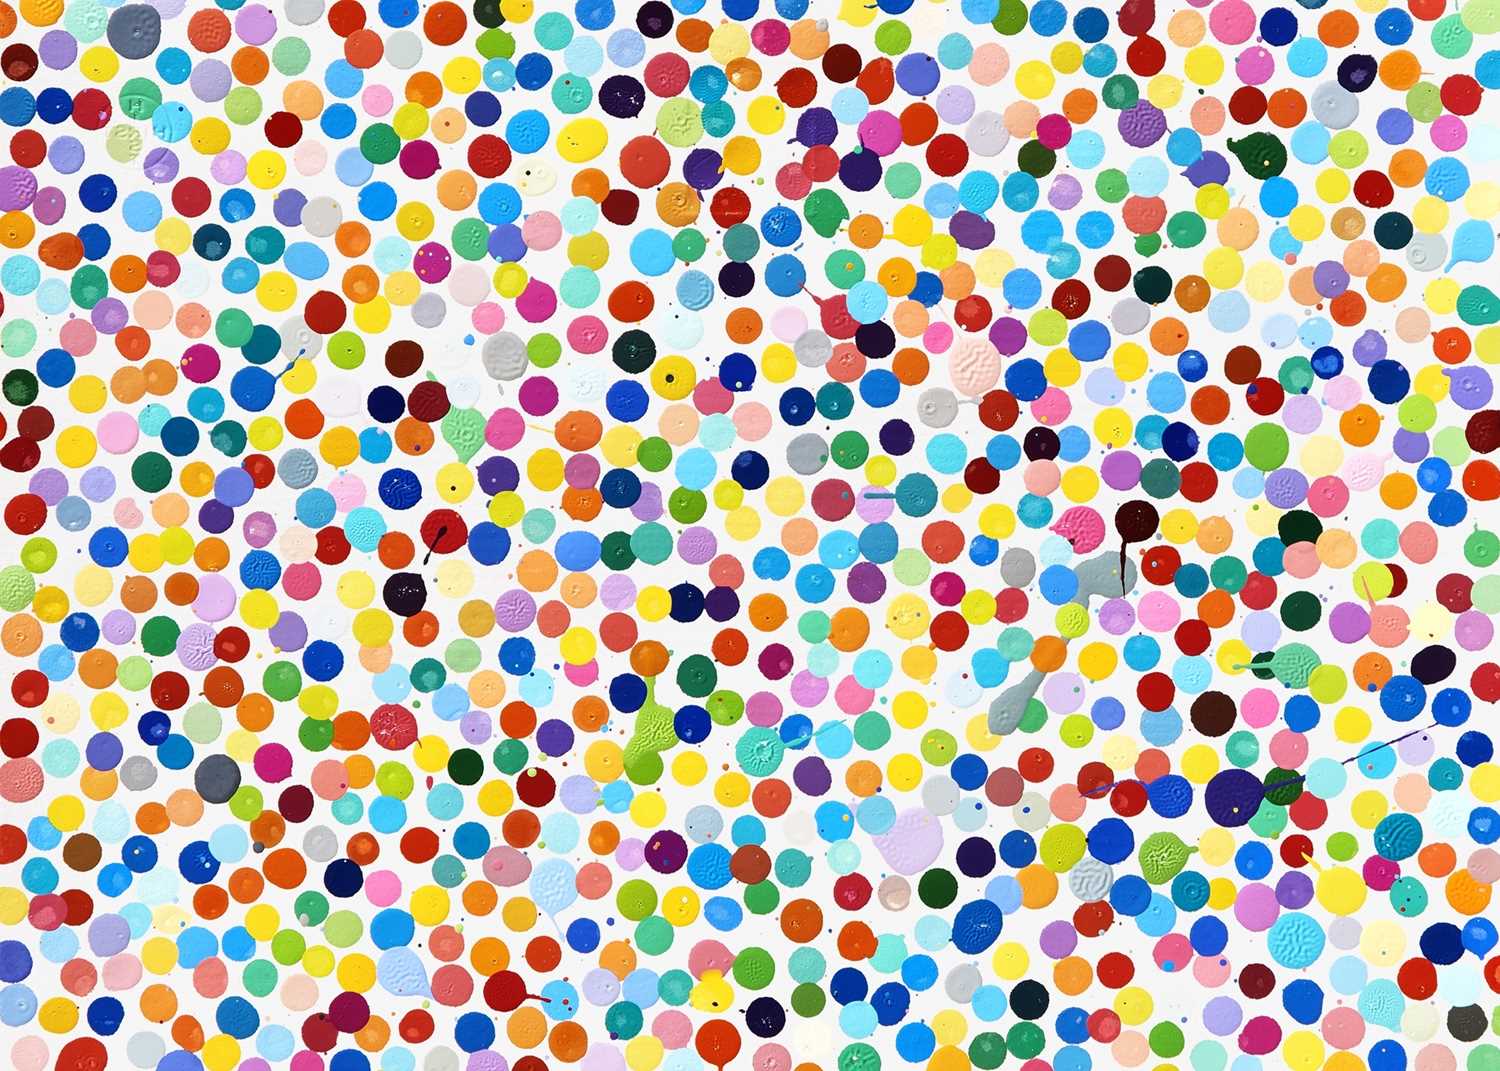 Damien Hirst (British 1965-), '3678. Talking To Those Words (The Currency)', 2016